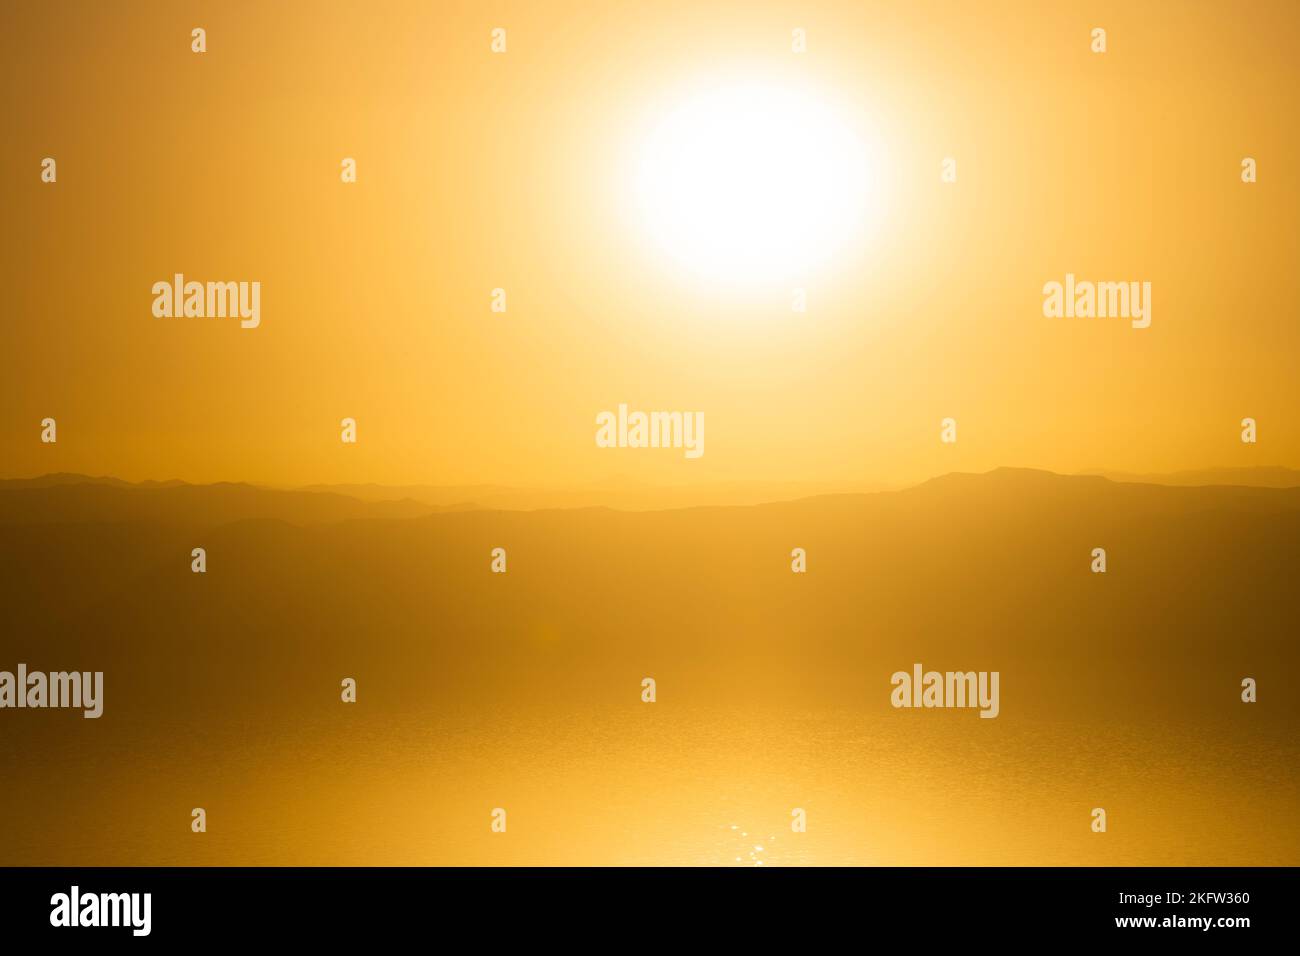 Amazing gold color in the landscape during the sunset or sunrise Stock Photo